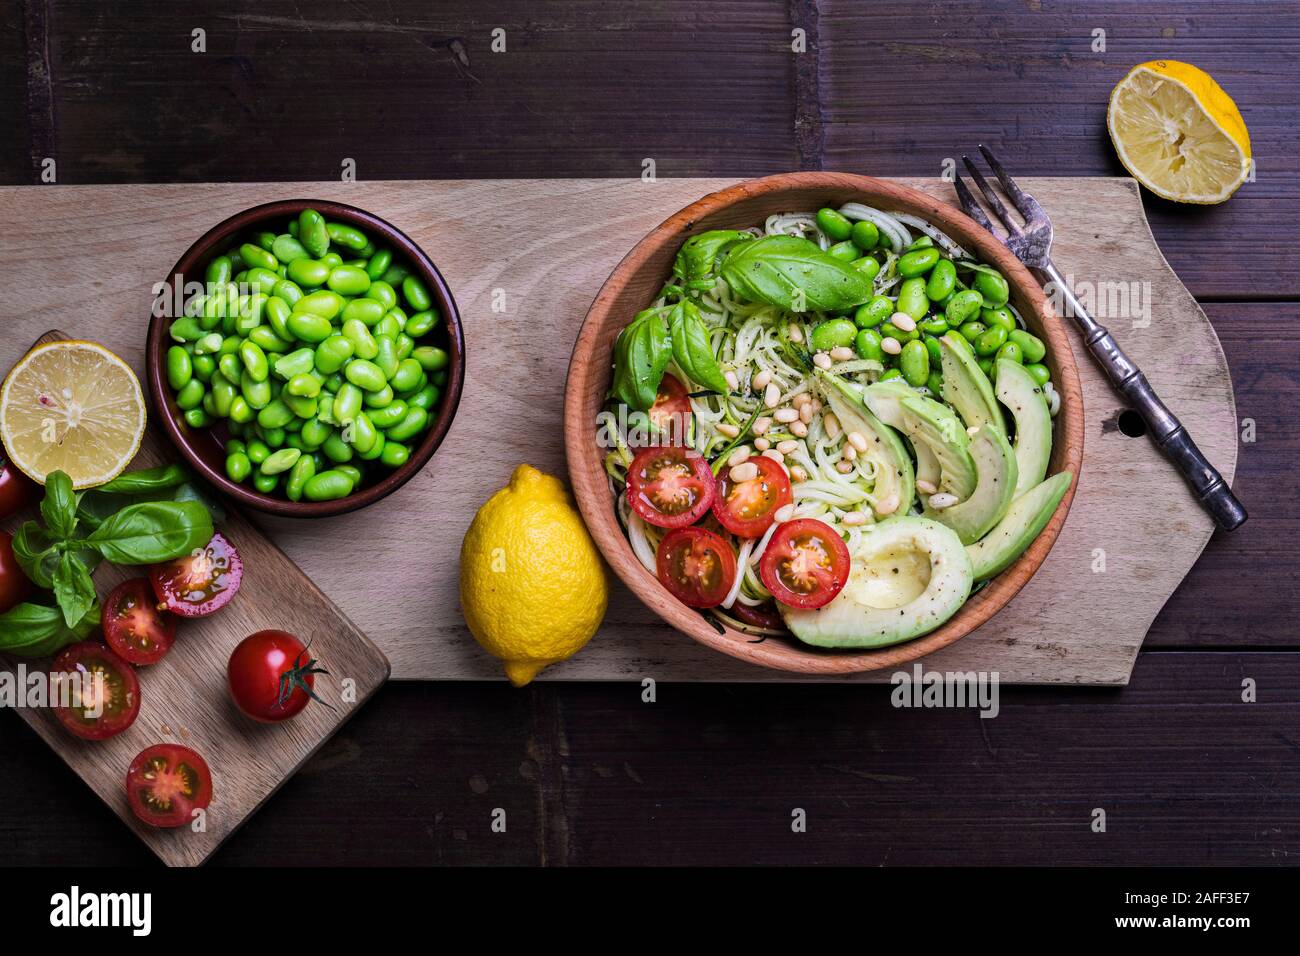 A fresh, healthy salad with zoodles zucchini noodles, baby tomatoes, avocado and edamame beans. The salad is in a wooden bowl on a dark bamboo table o Stock Photo